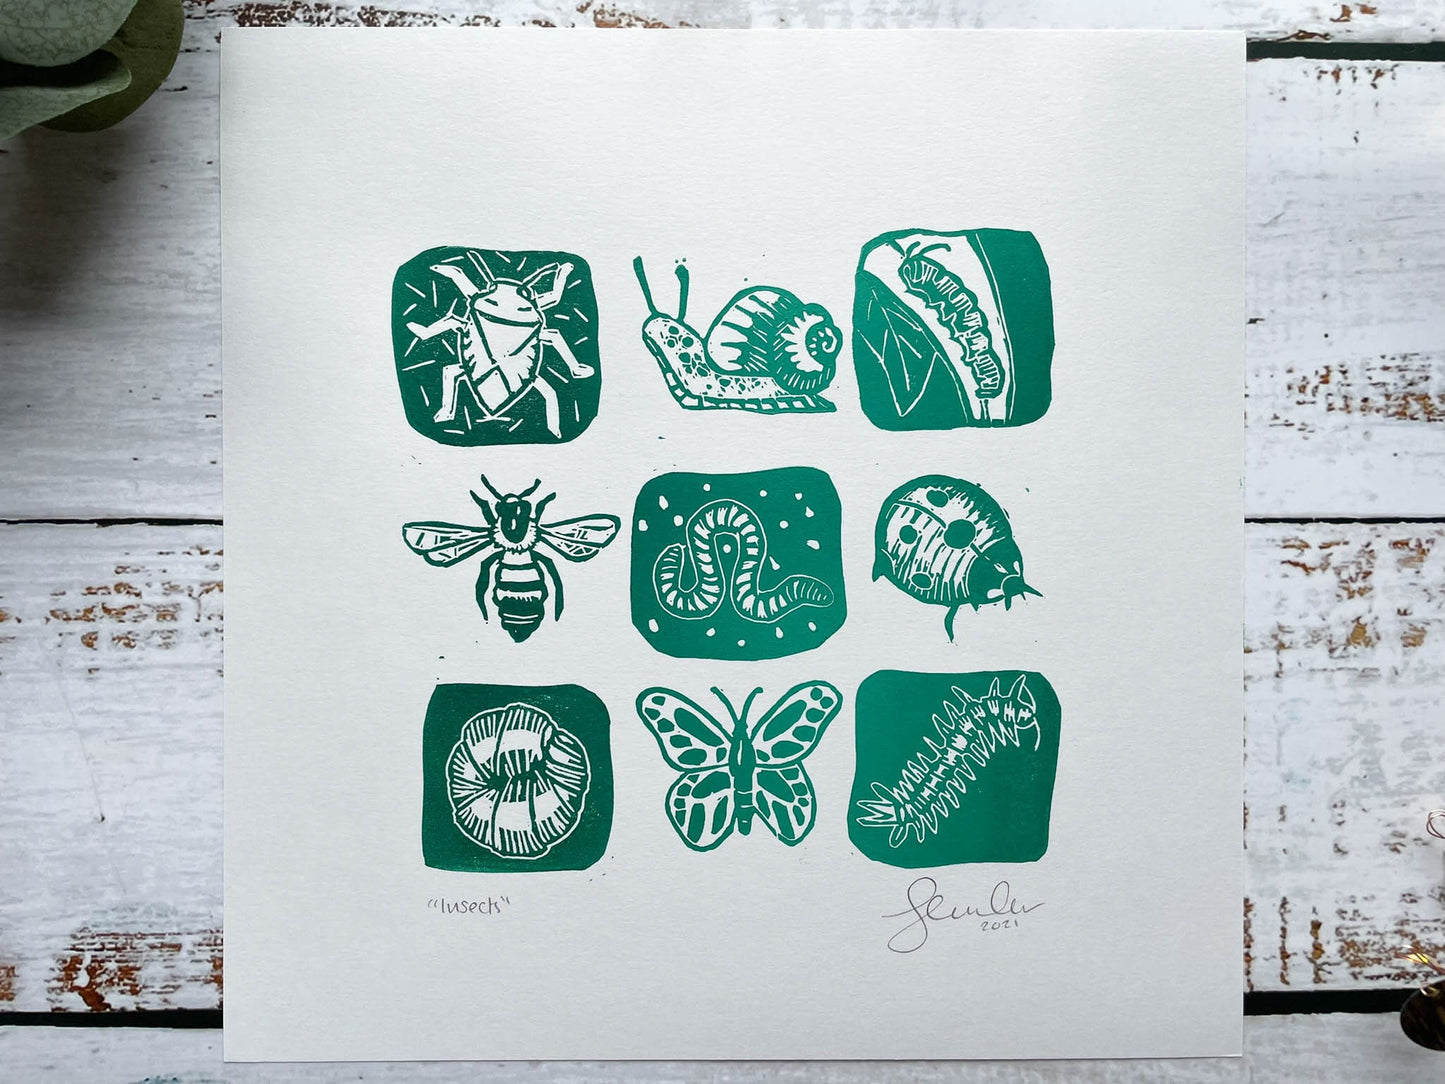 A lino print of a 3 x 3 grid of mini-beasts in a dark to light green gradient